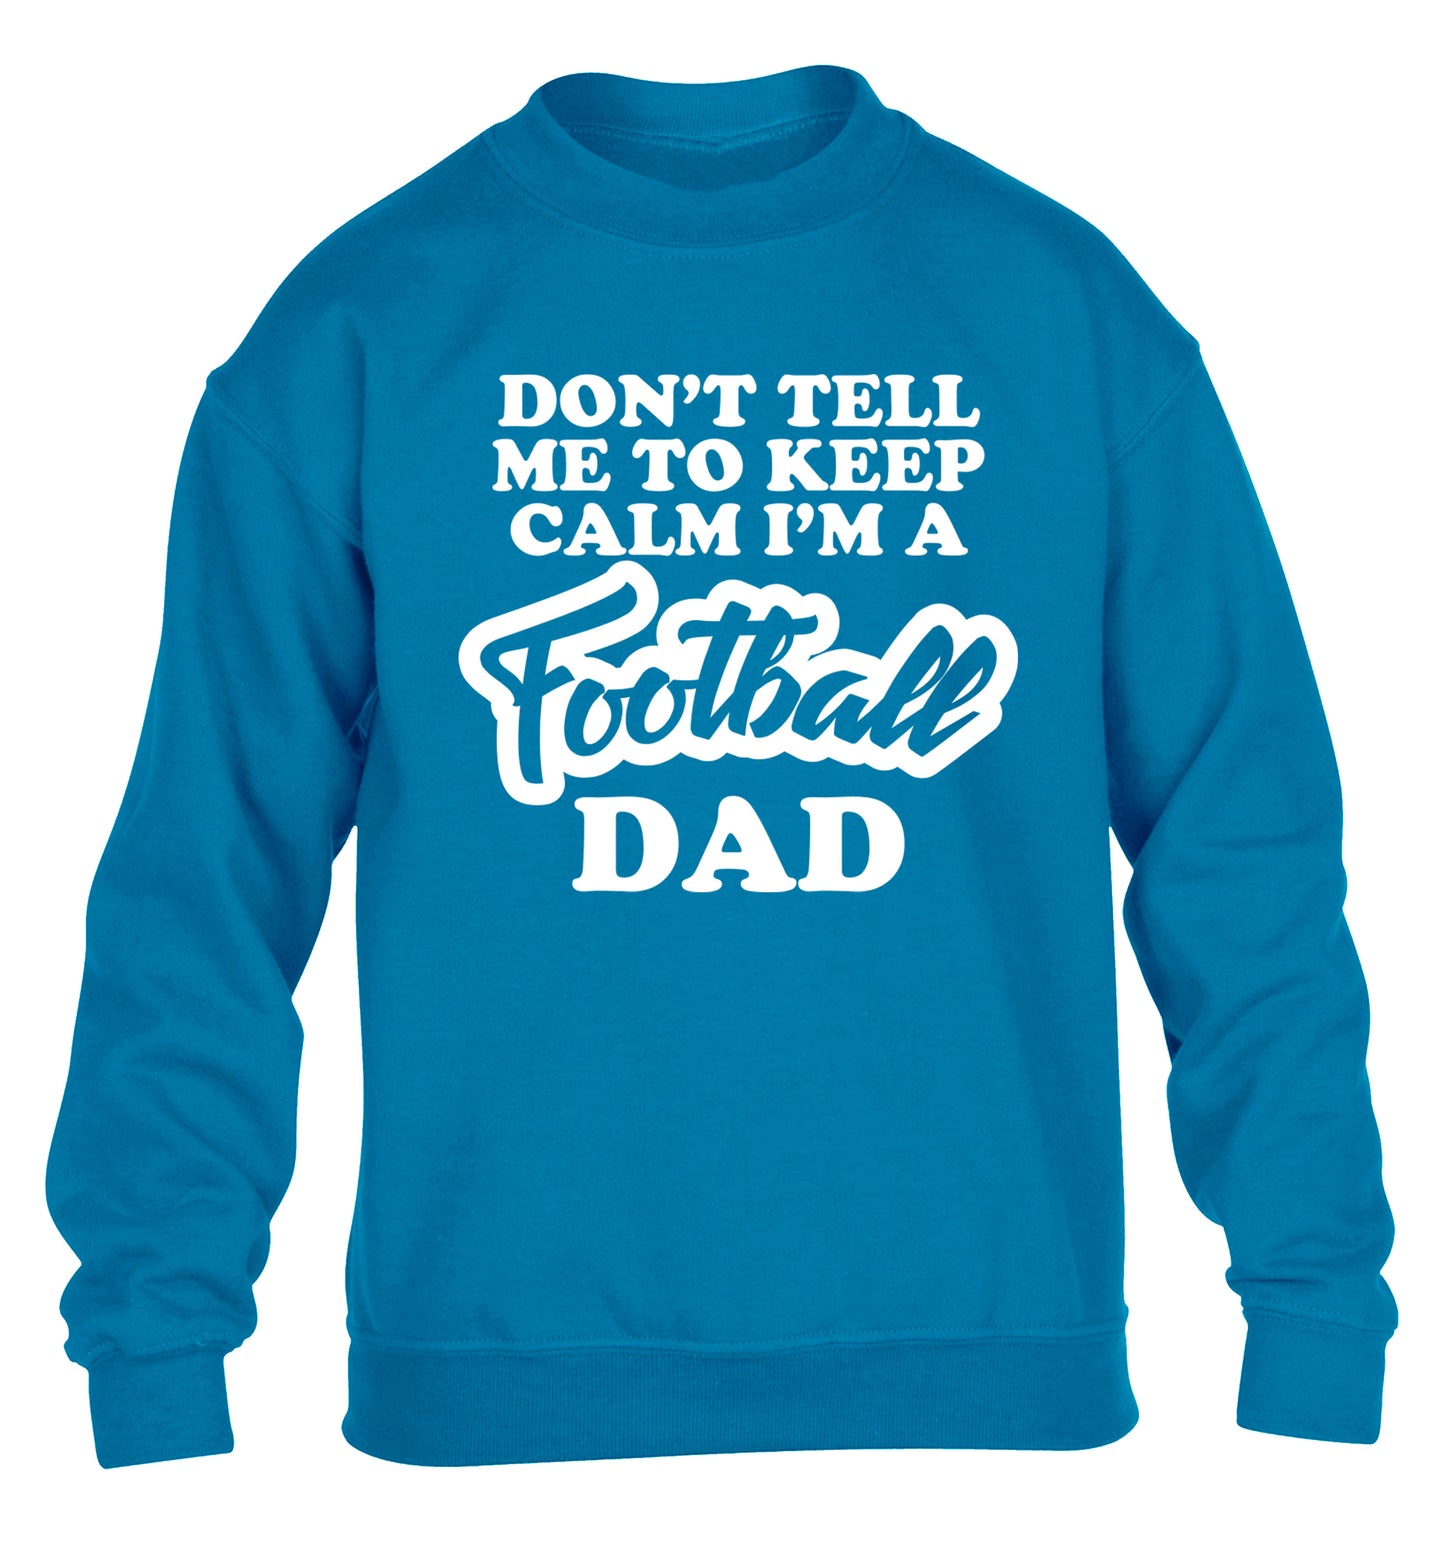 Don't tell me to keep calm I'm a football dad children's blue sweater 12-14 Years